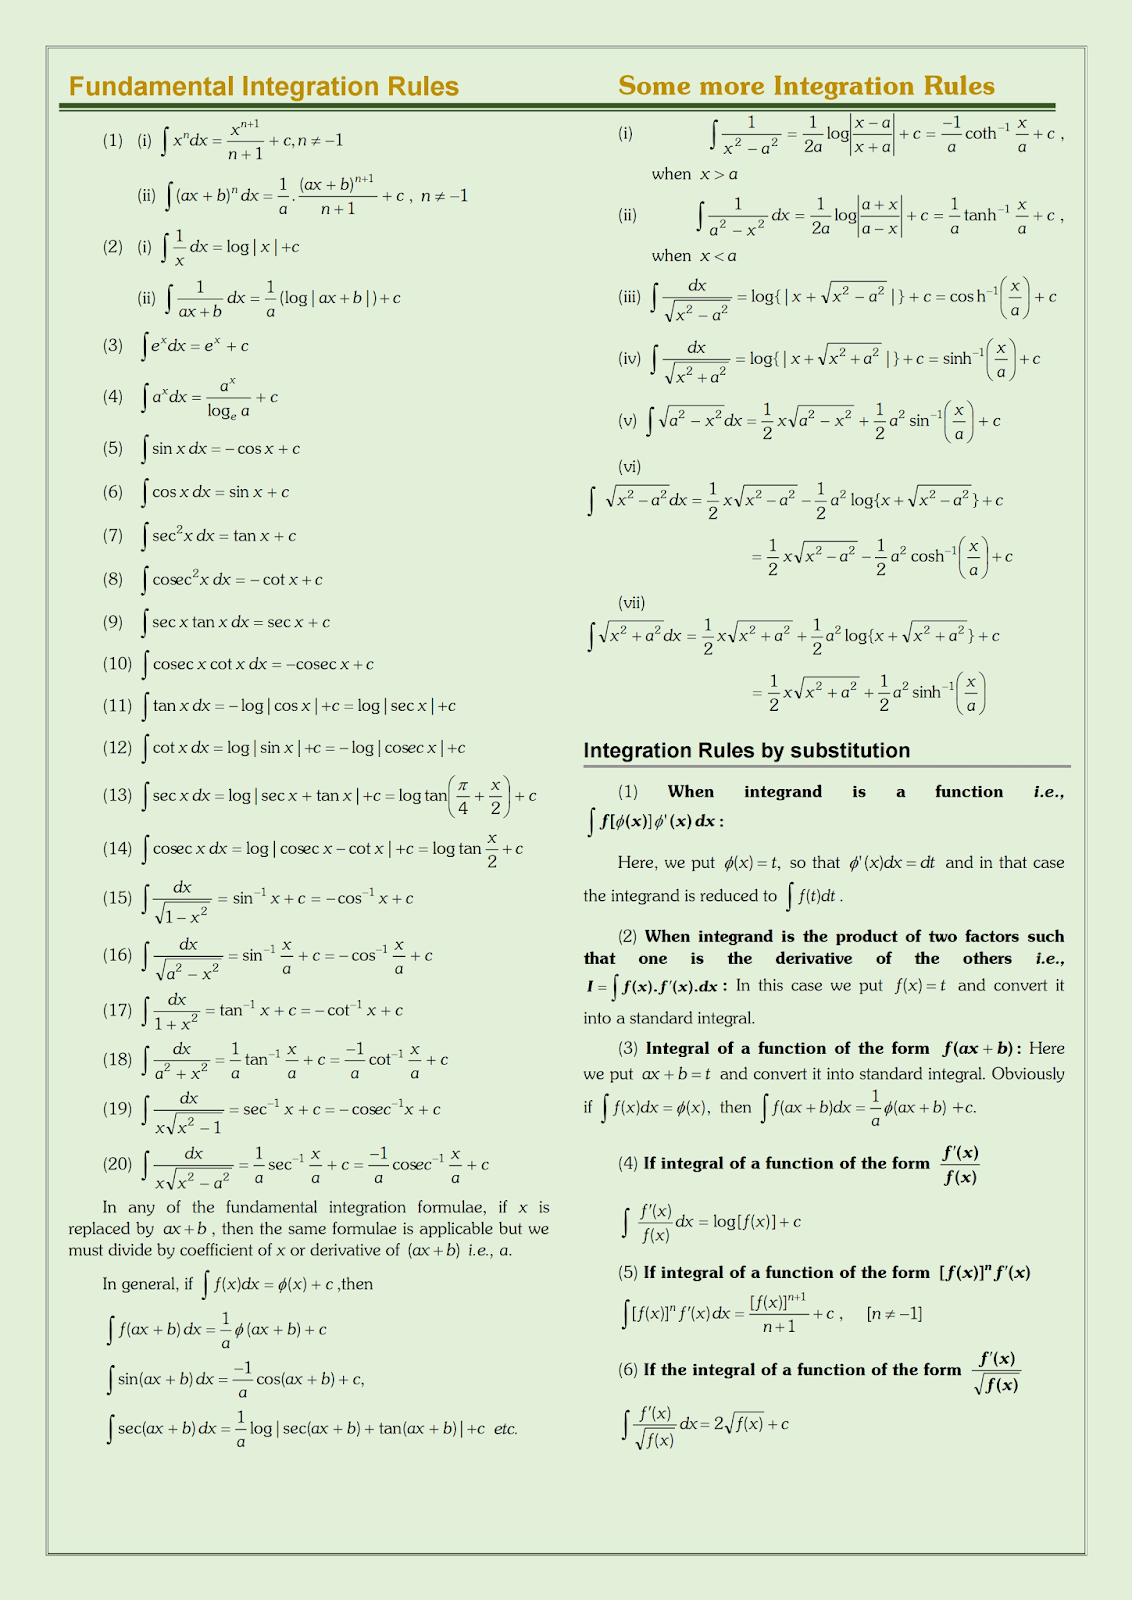  integrate synonym, integration rules, integration definition, another word for integrate, integrated meaning, the integration, racial integration, integration rules, integration of 2x, integration by parts, integration formulas, integration made easy, online integration, Integral Calculus help, math tutor, calc help, calculus online 